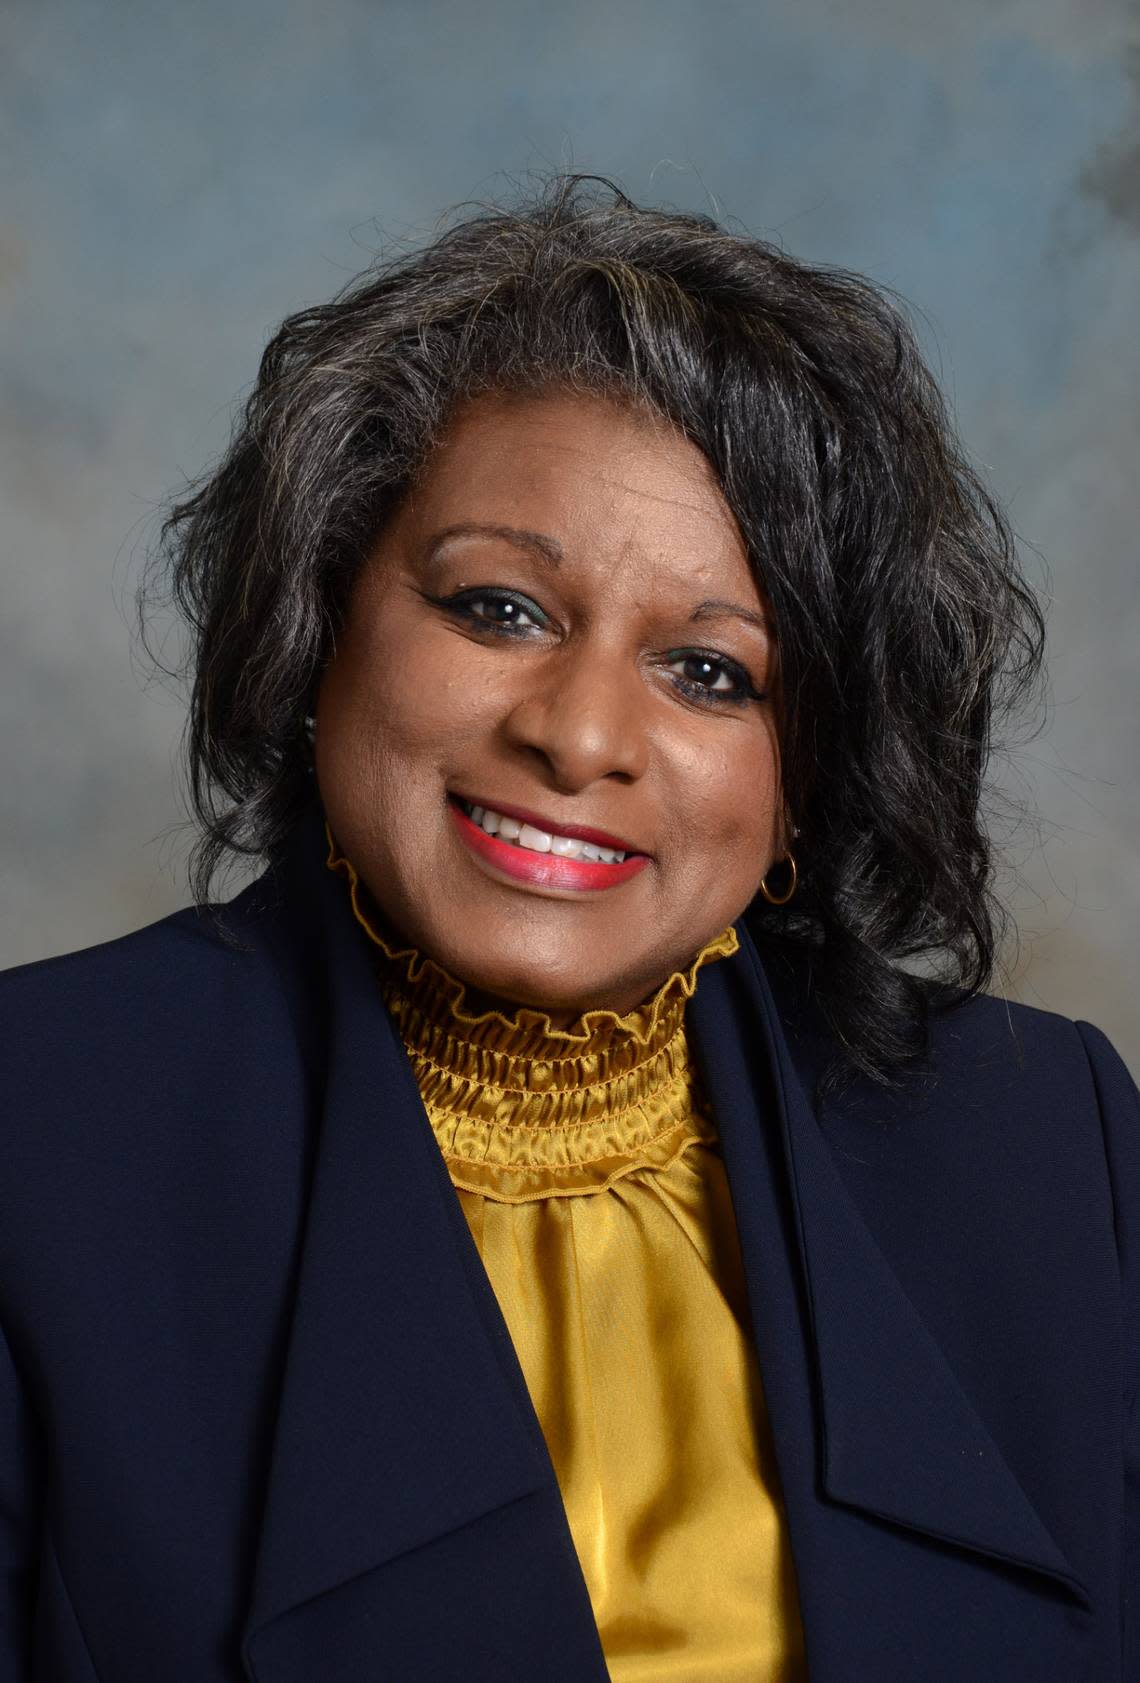 Sundra Woodford, who currently serves on the Bibb County School Board of Education for District 5, is running for reelection. Courtesy of Bibb County School District